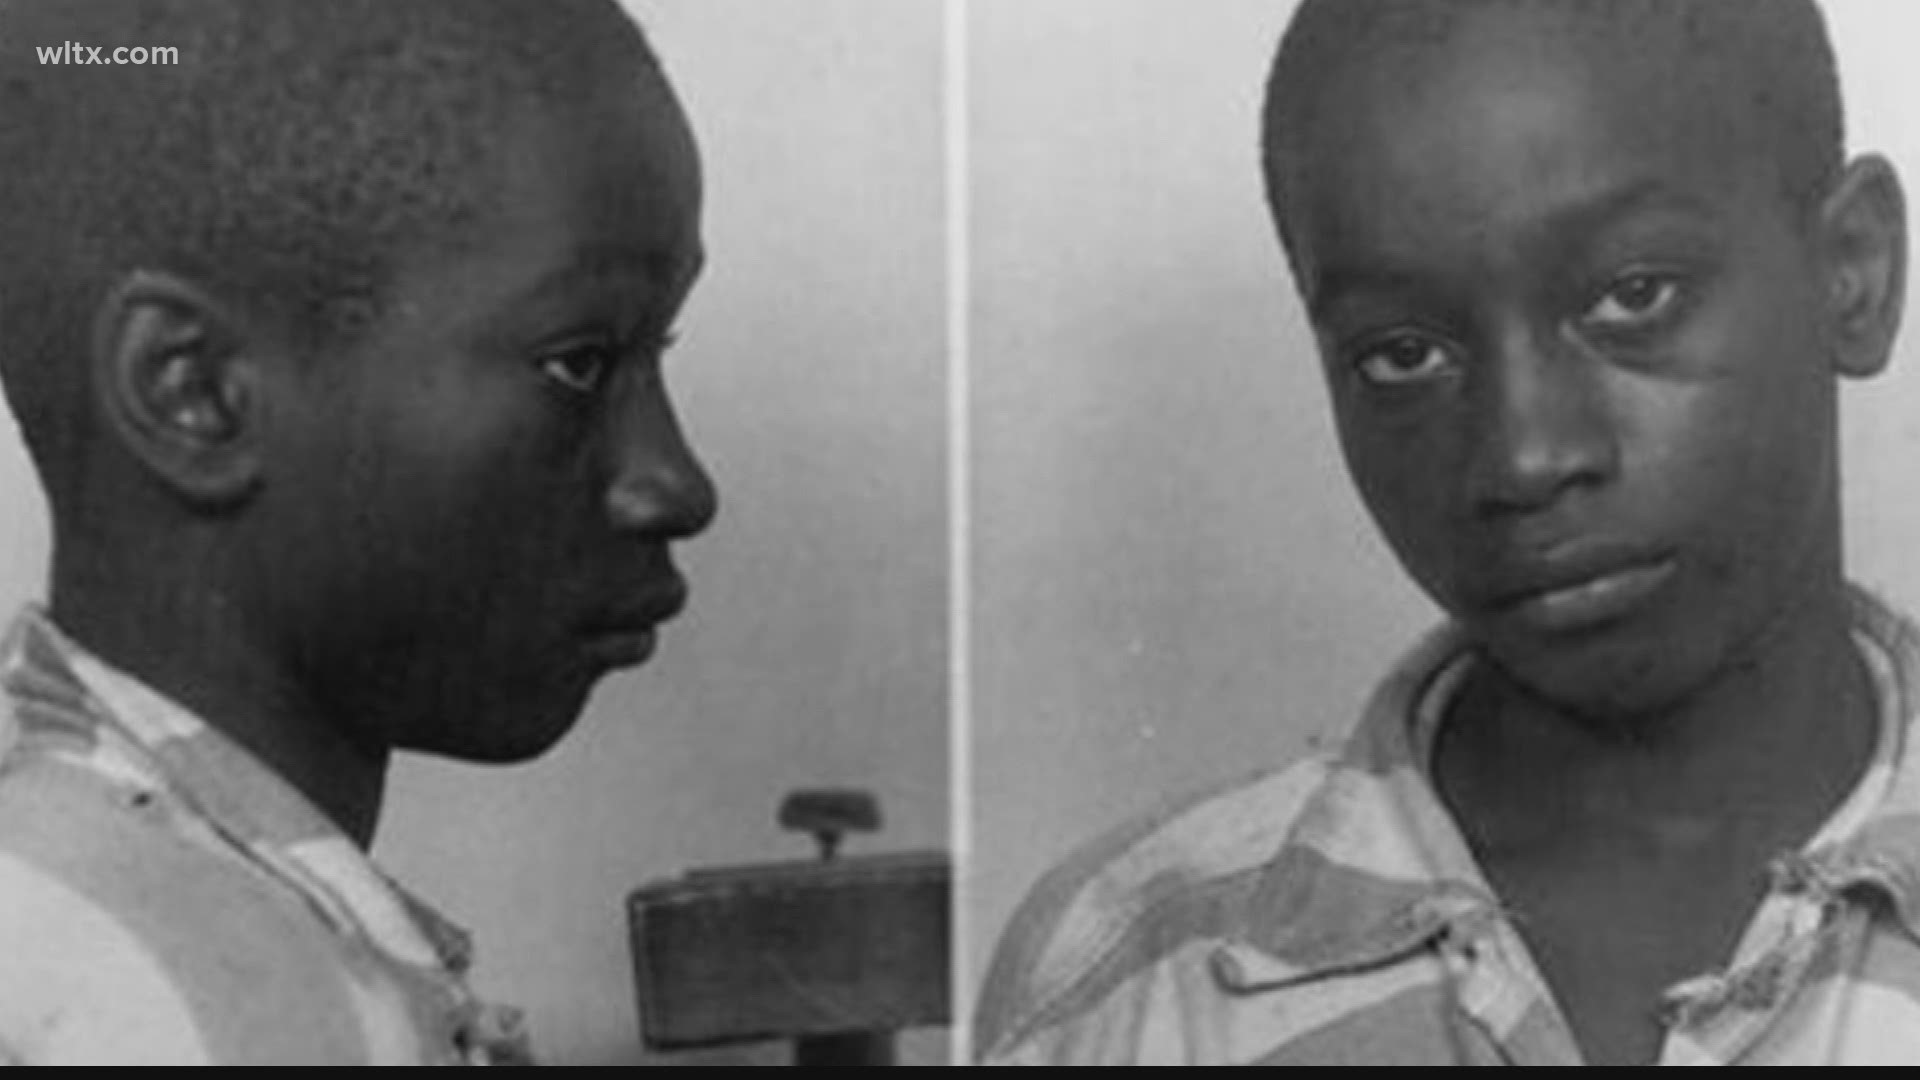 On this date, 14-year-old George Stinney was executed for killing two girls in Clarendon county, but may doubted he was guilty